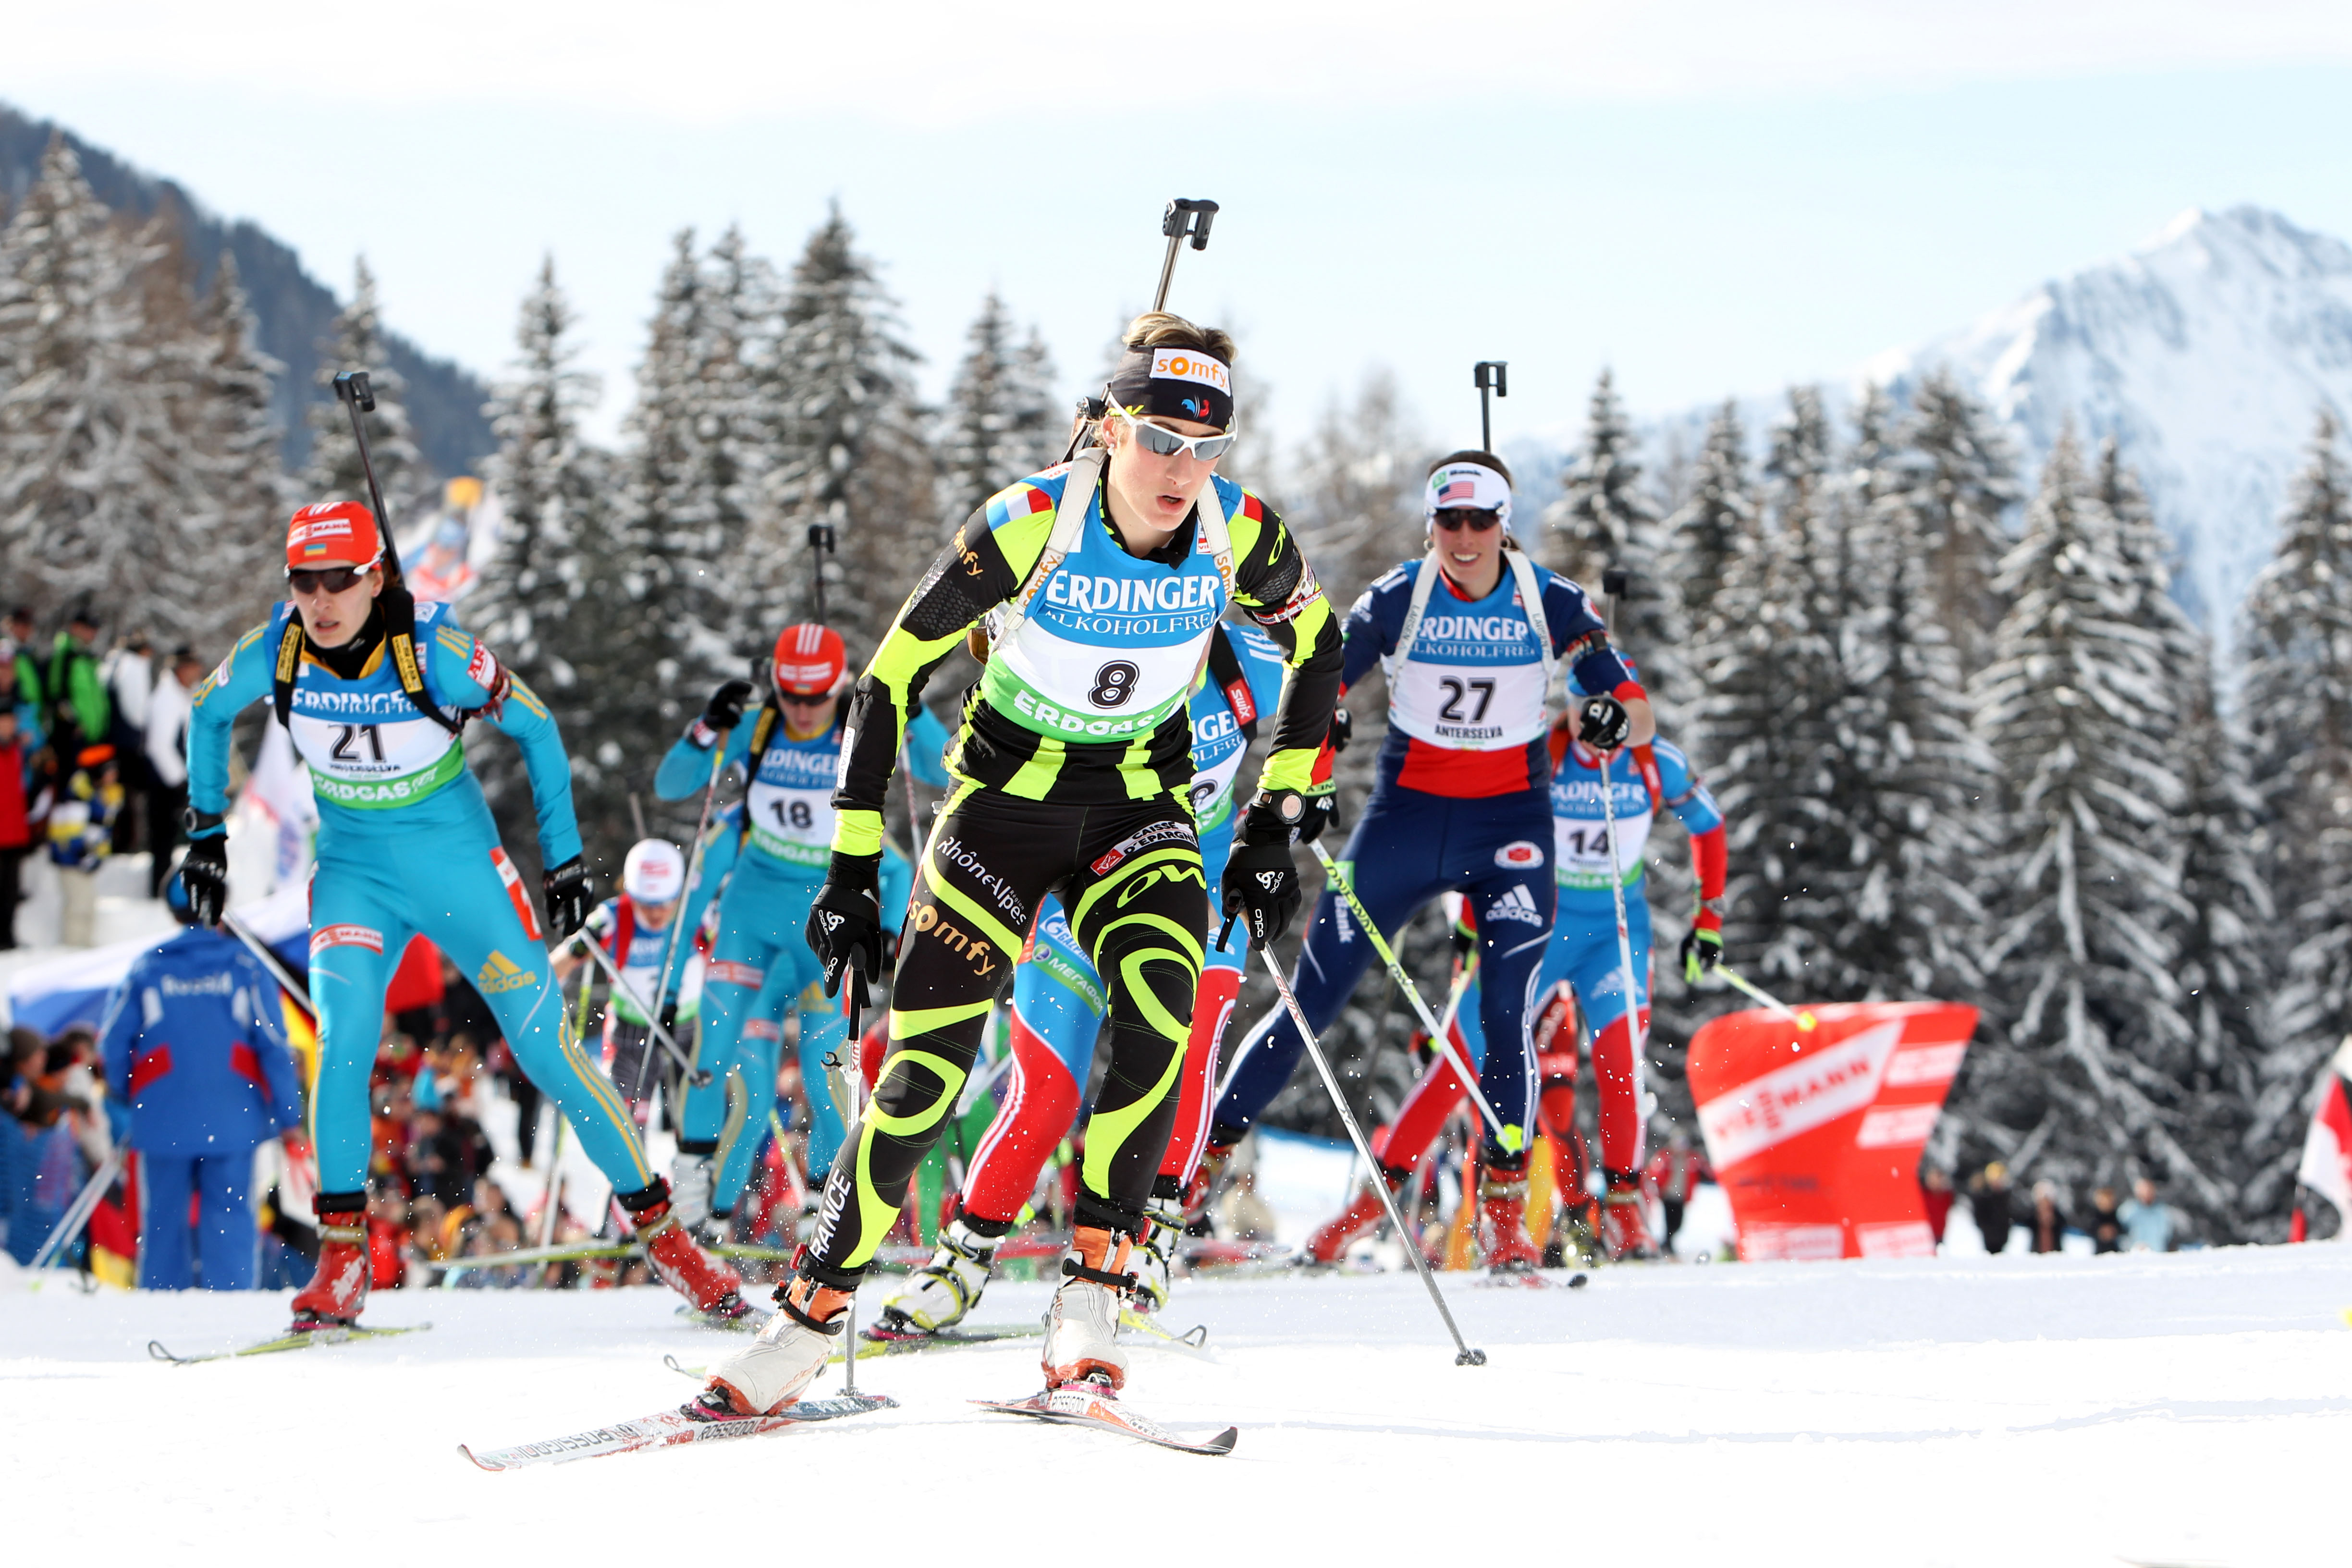 Domracheva Makes Up for Early Error With Surprise Ascent to Victory; Dunklee 27th in First World Cup Mass Start